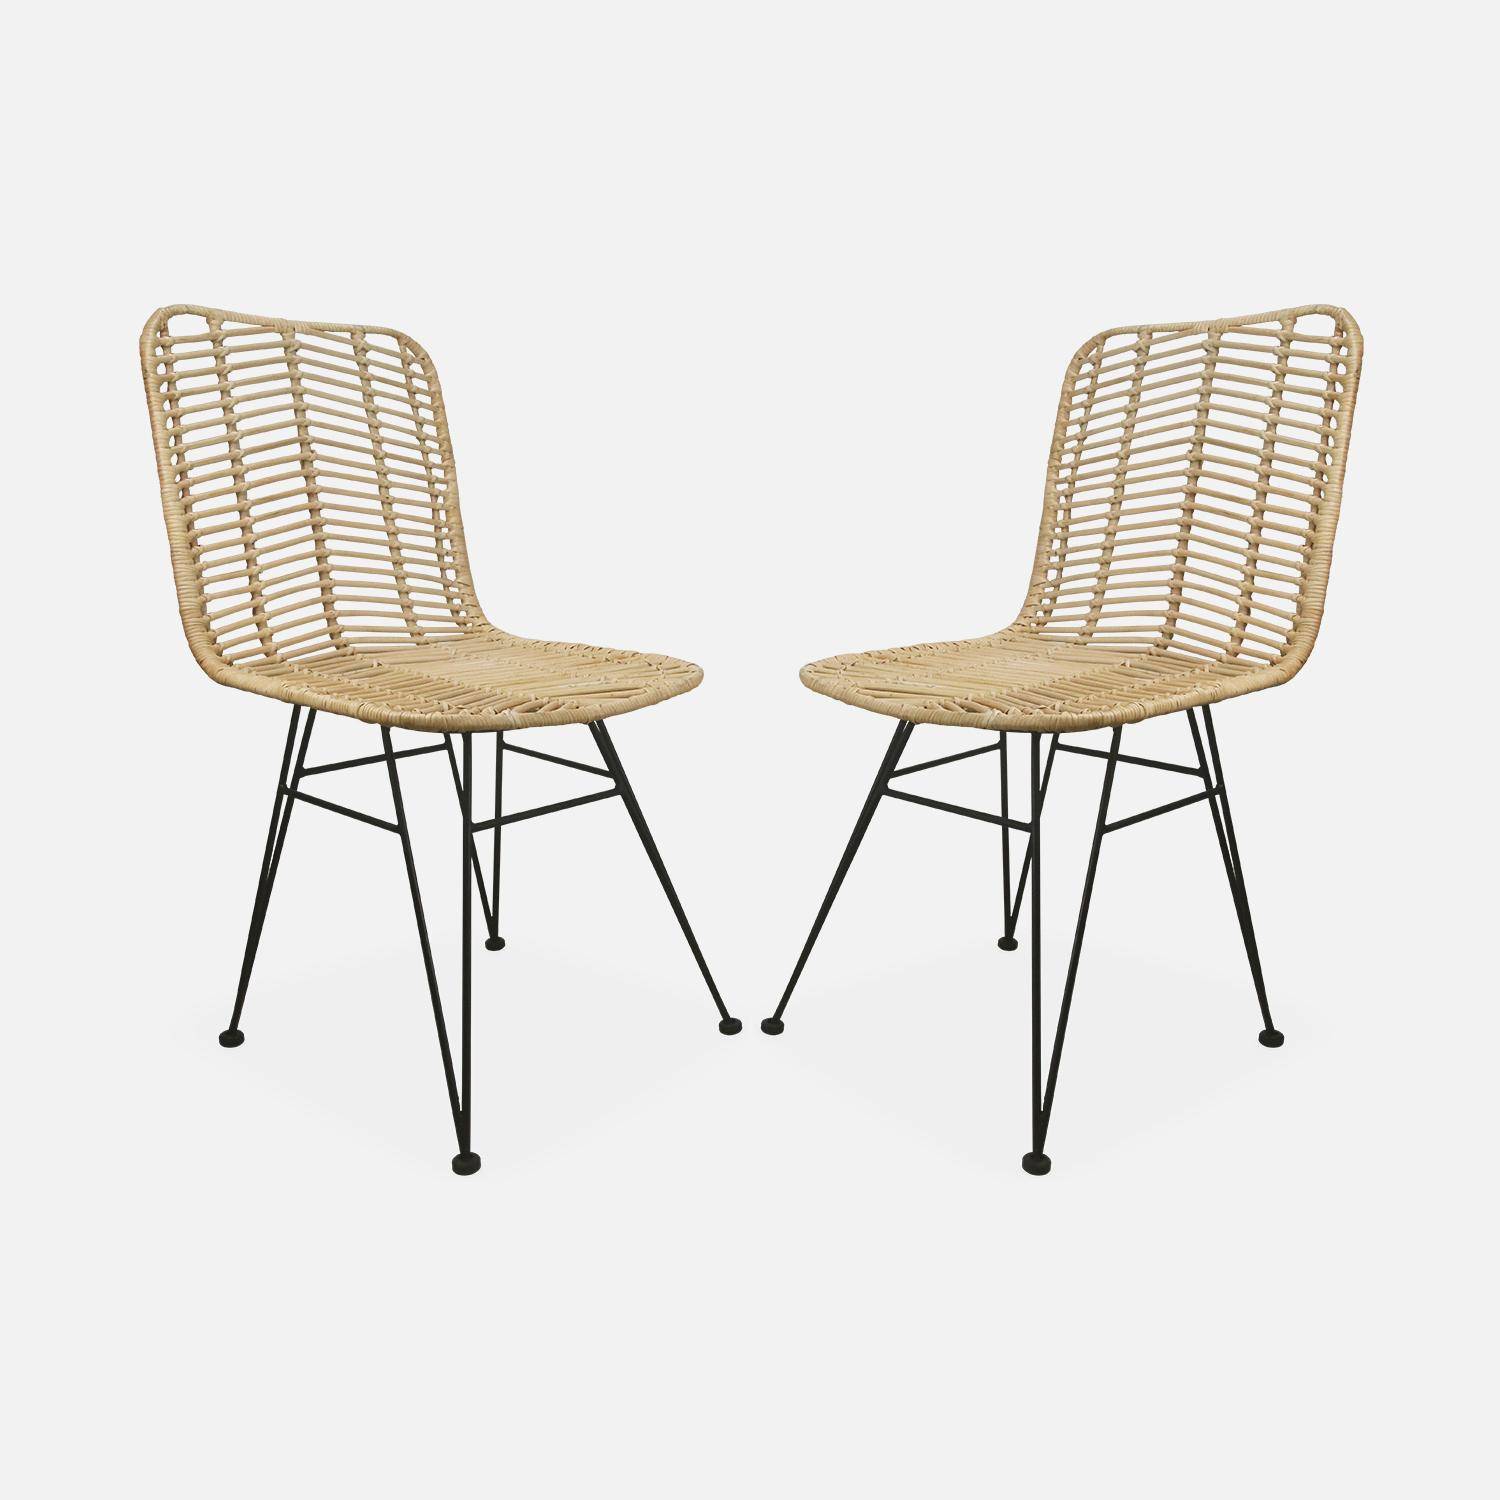 Pair of high-backed rattan dining chairs with metal legs and cushions - Cahya - Natural rattan, White cushions Photo7